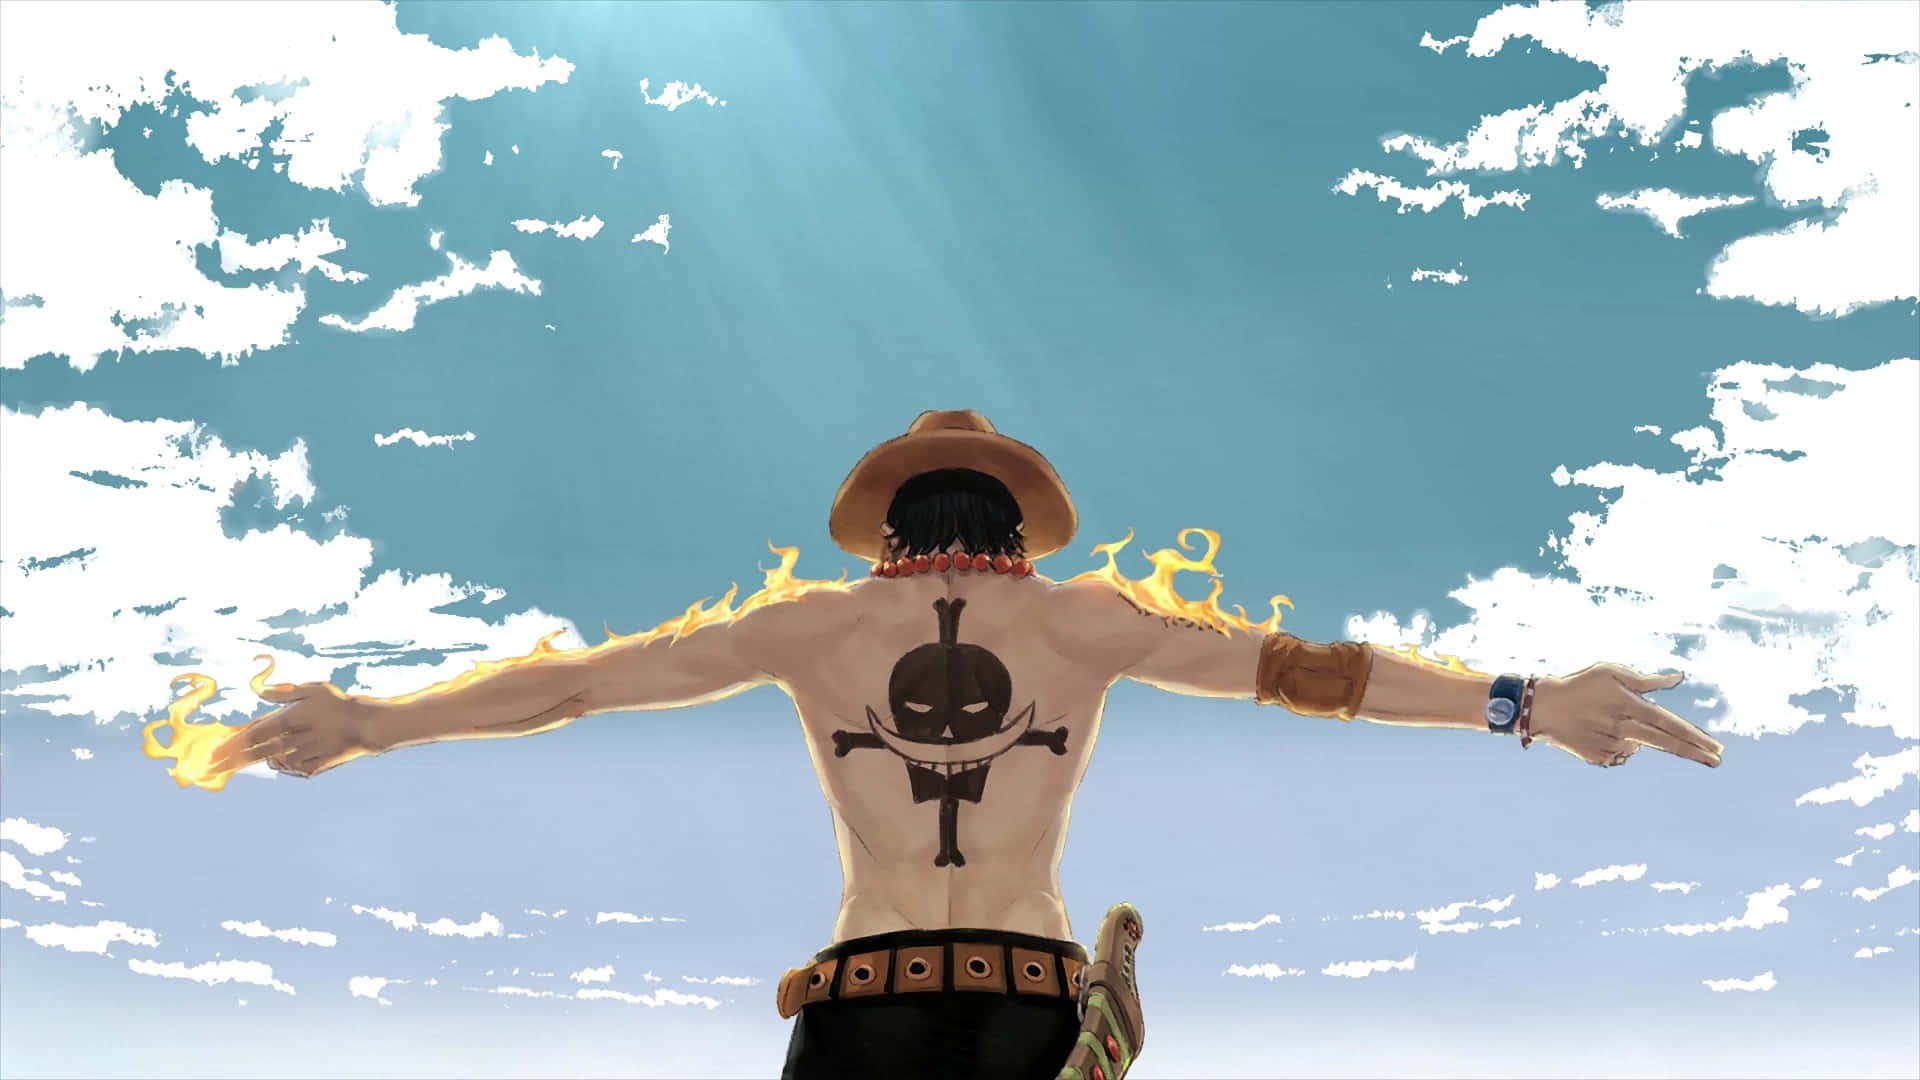 Portgas D. Ace, the strongest member of Whitebeard's pirate crew Wallpaper